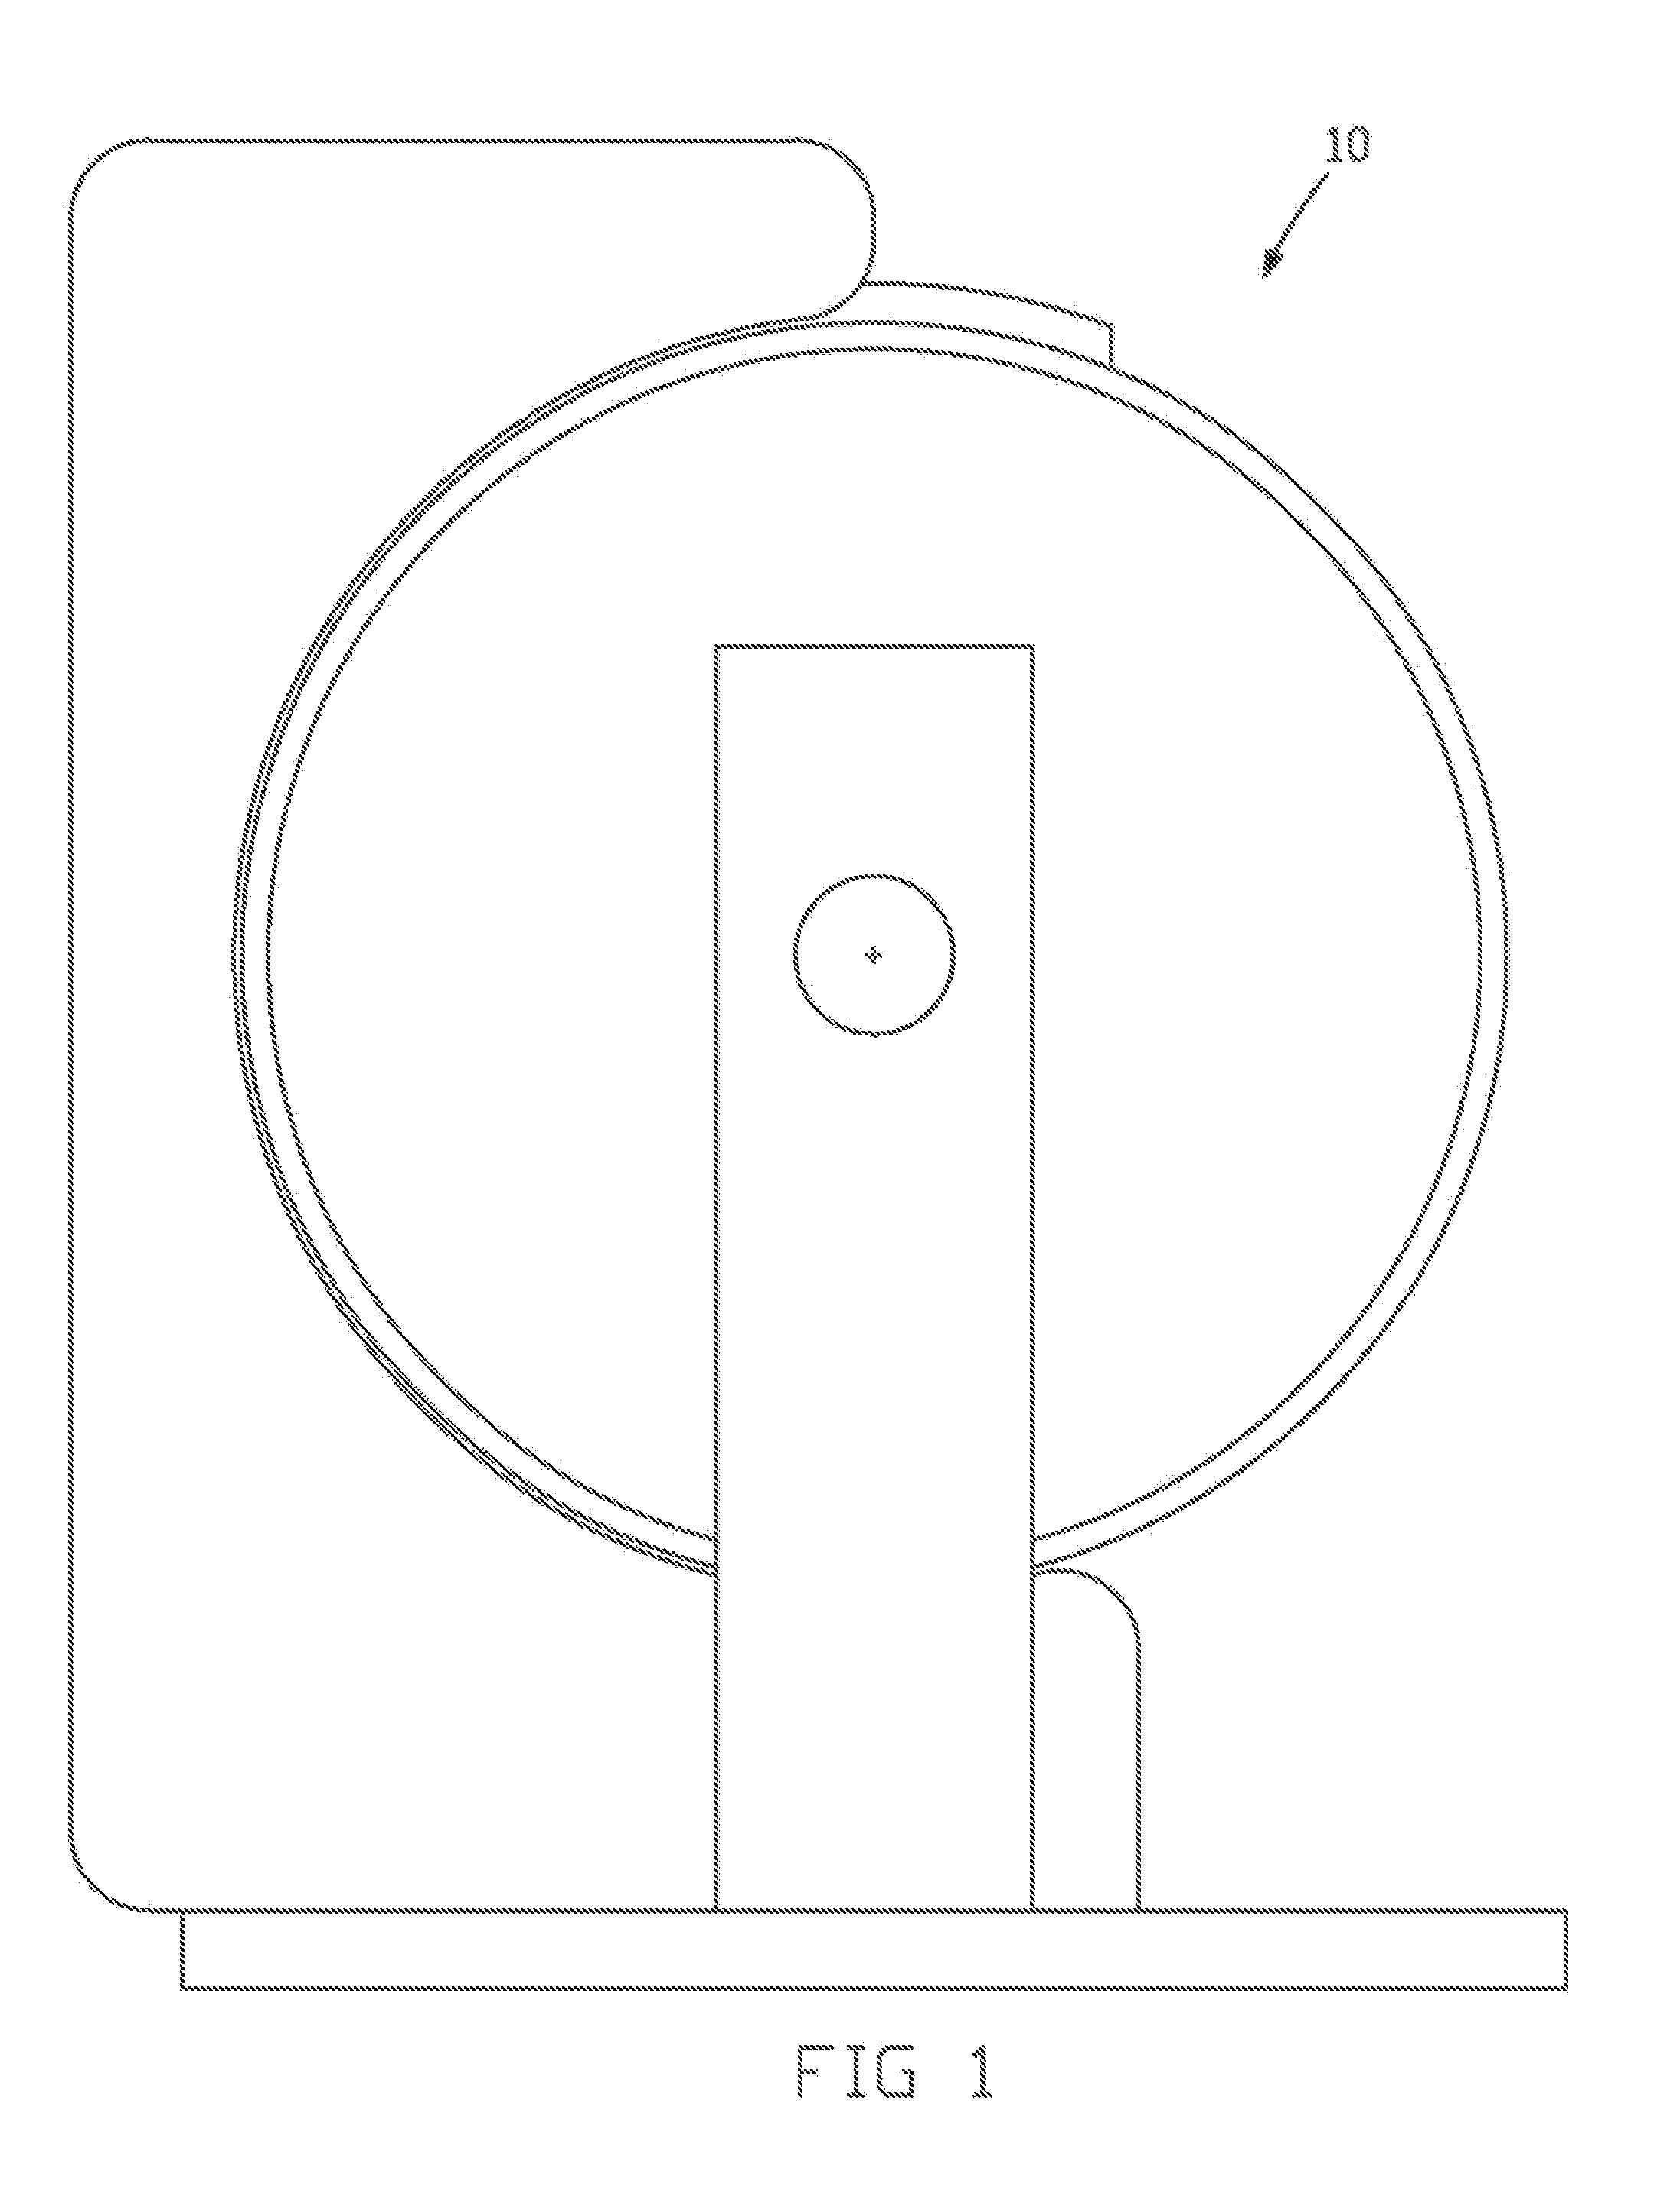 Device for providing rotational torque and method of use